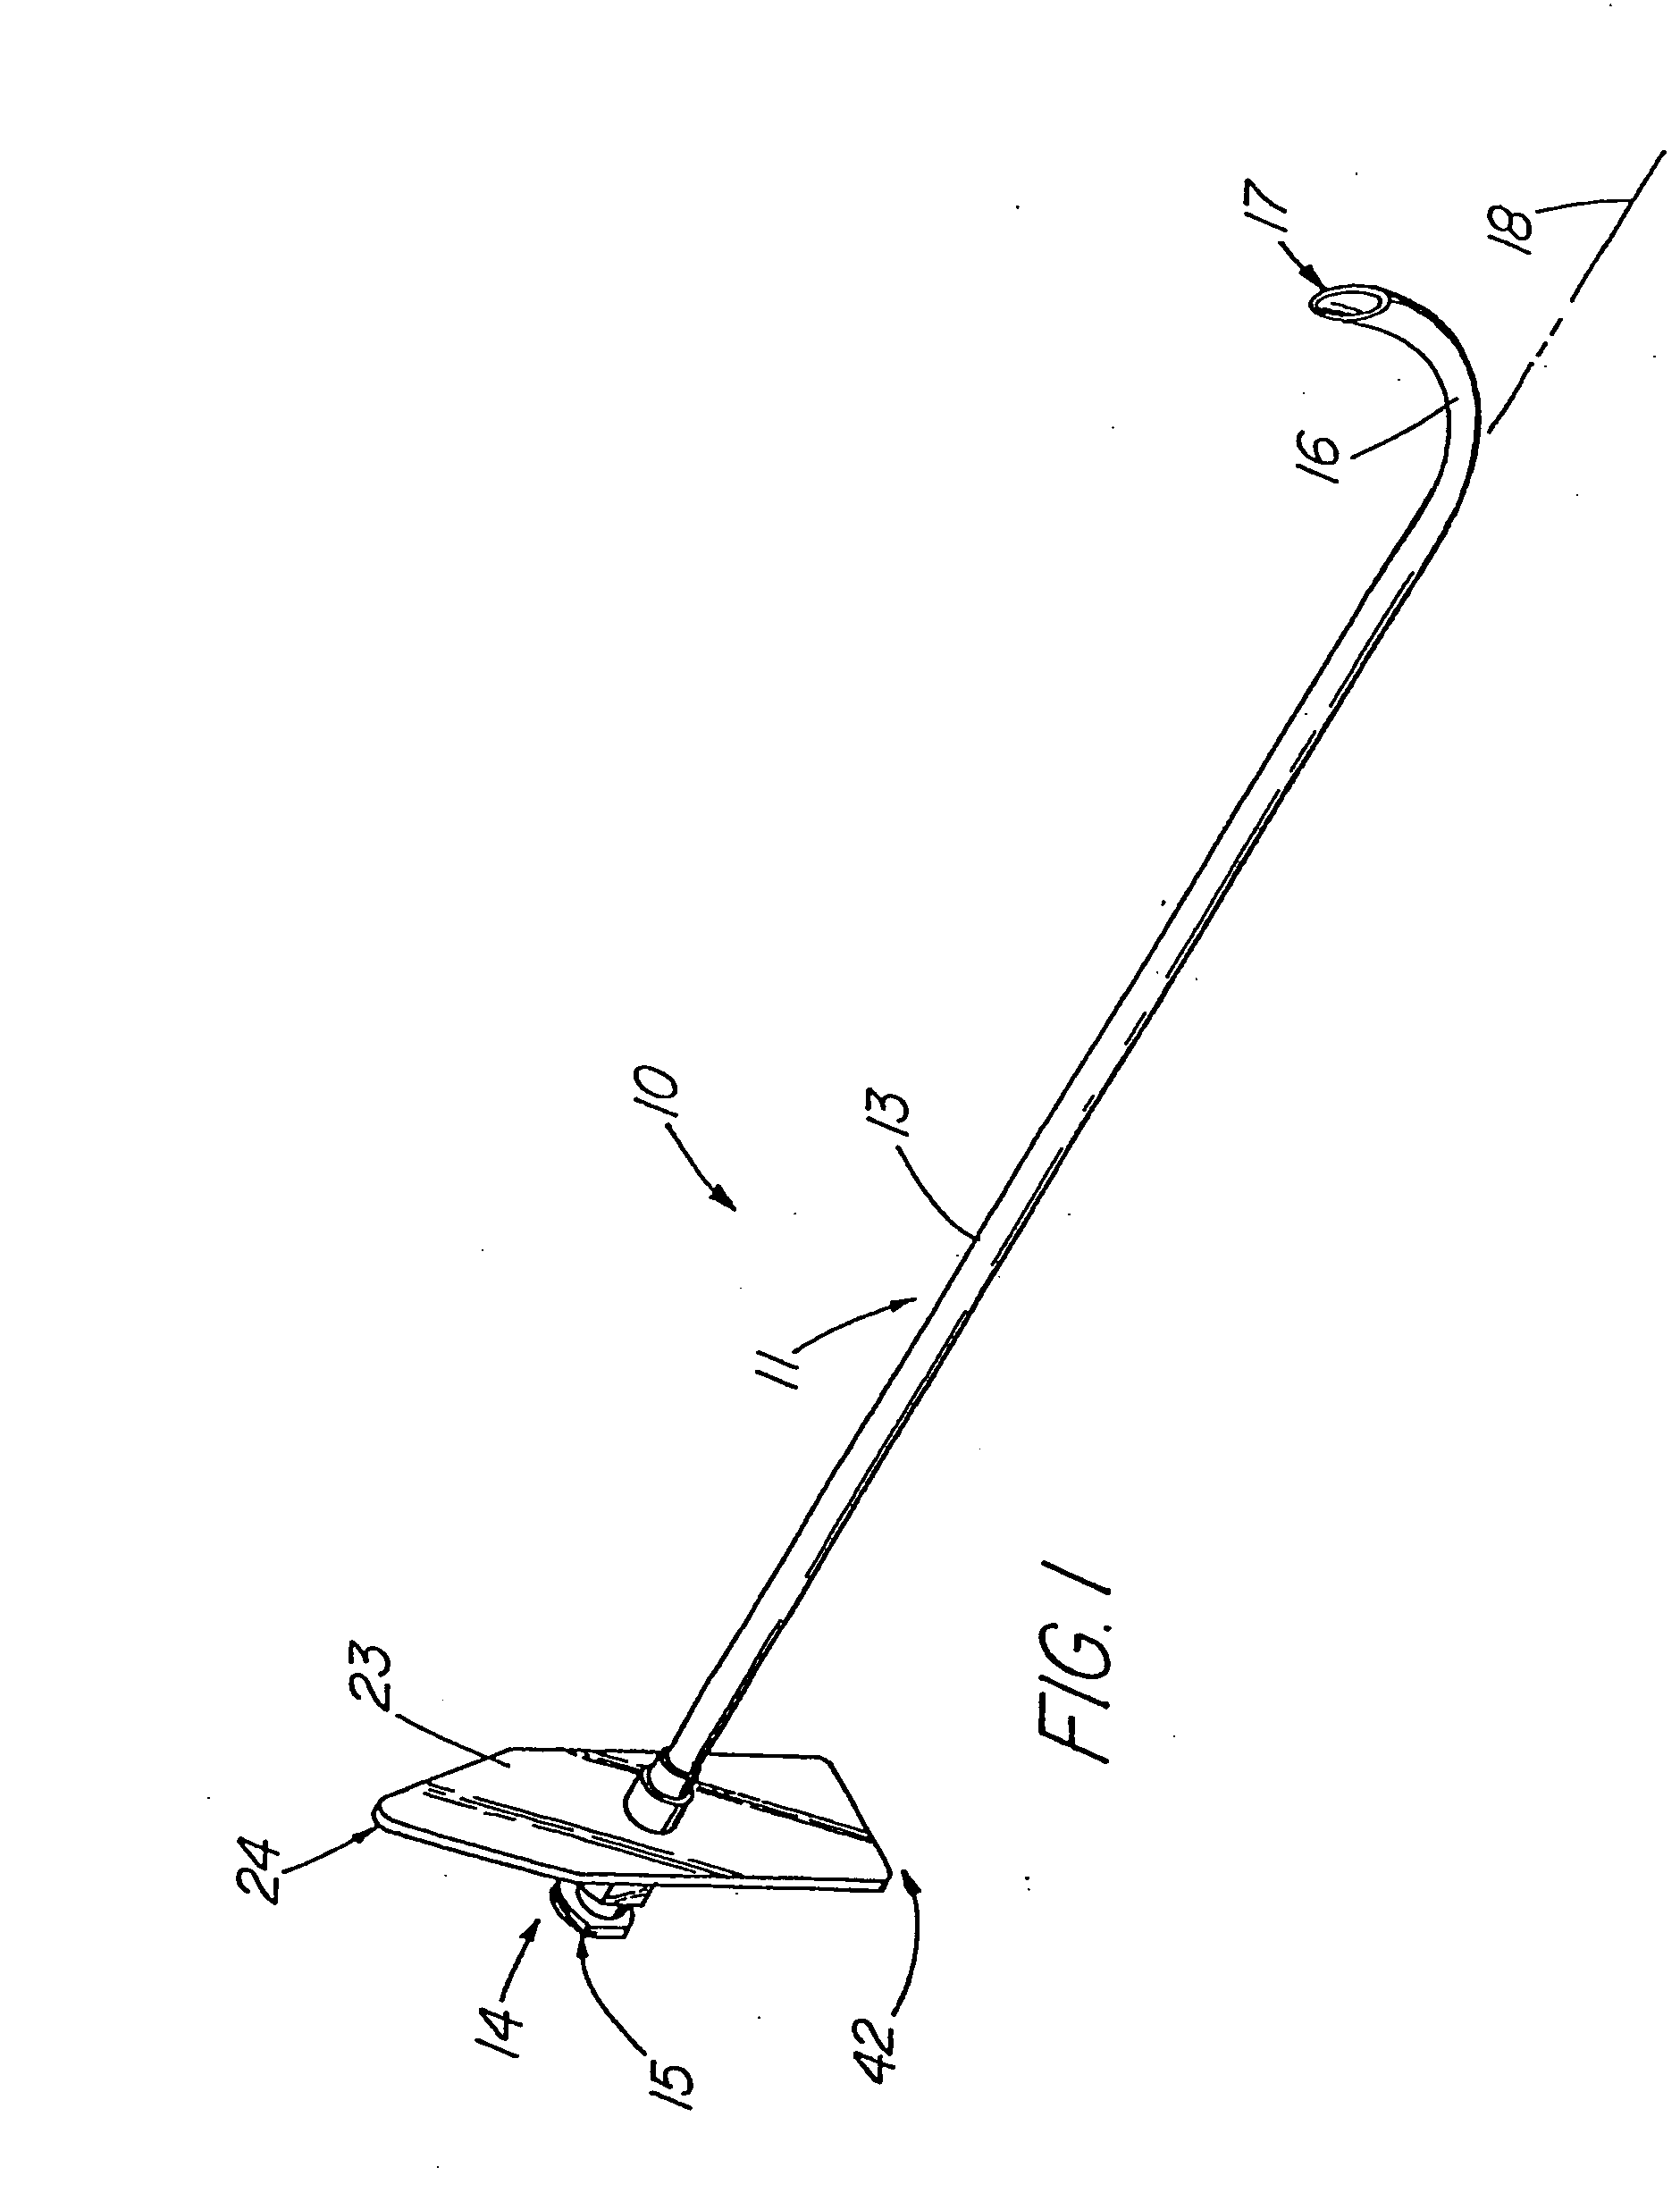 Hollow curved superelastic medical needle and method